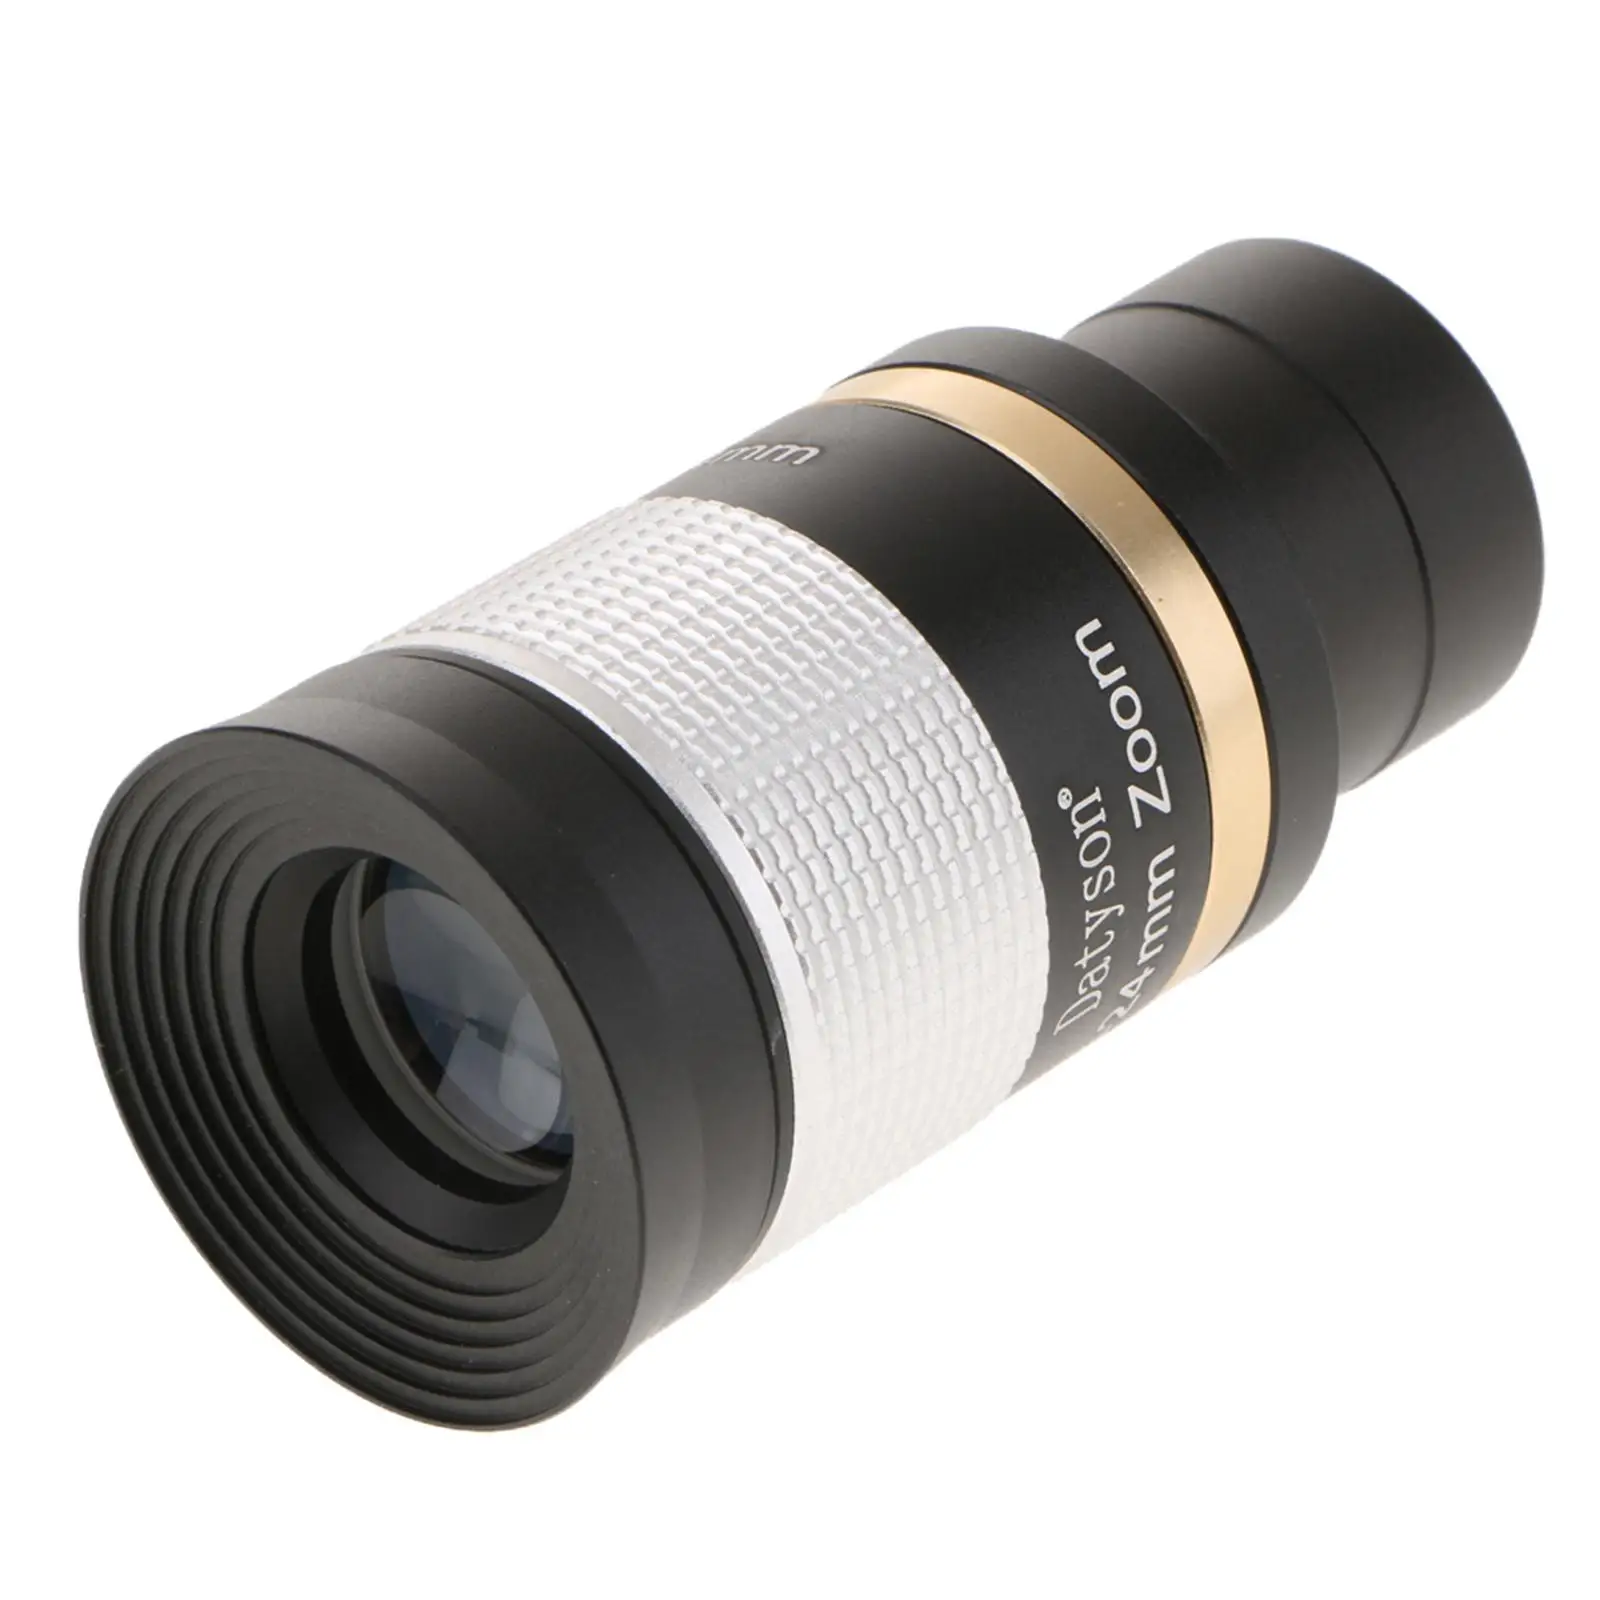 8-24mm ``  Eyepiece for Telescope  Astronomy - Field of View